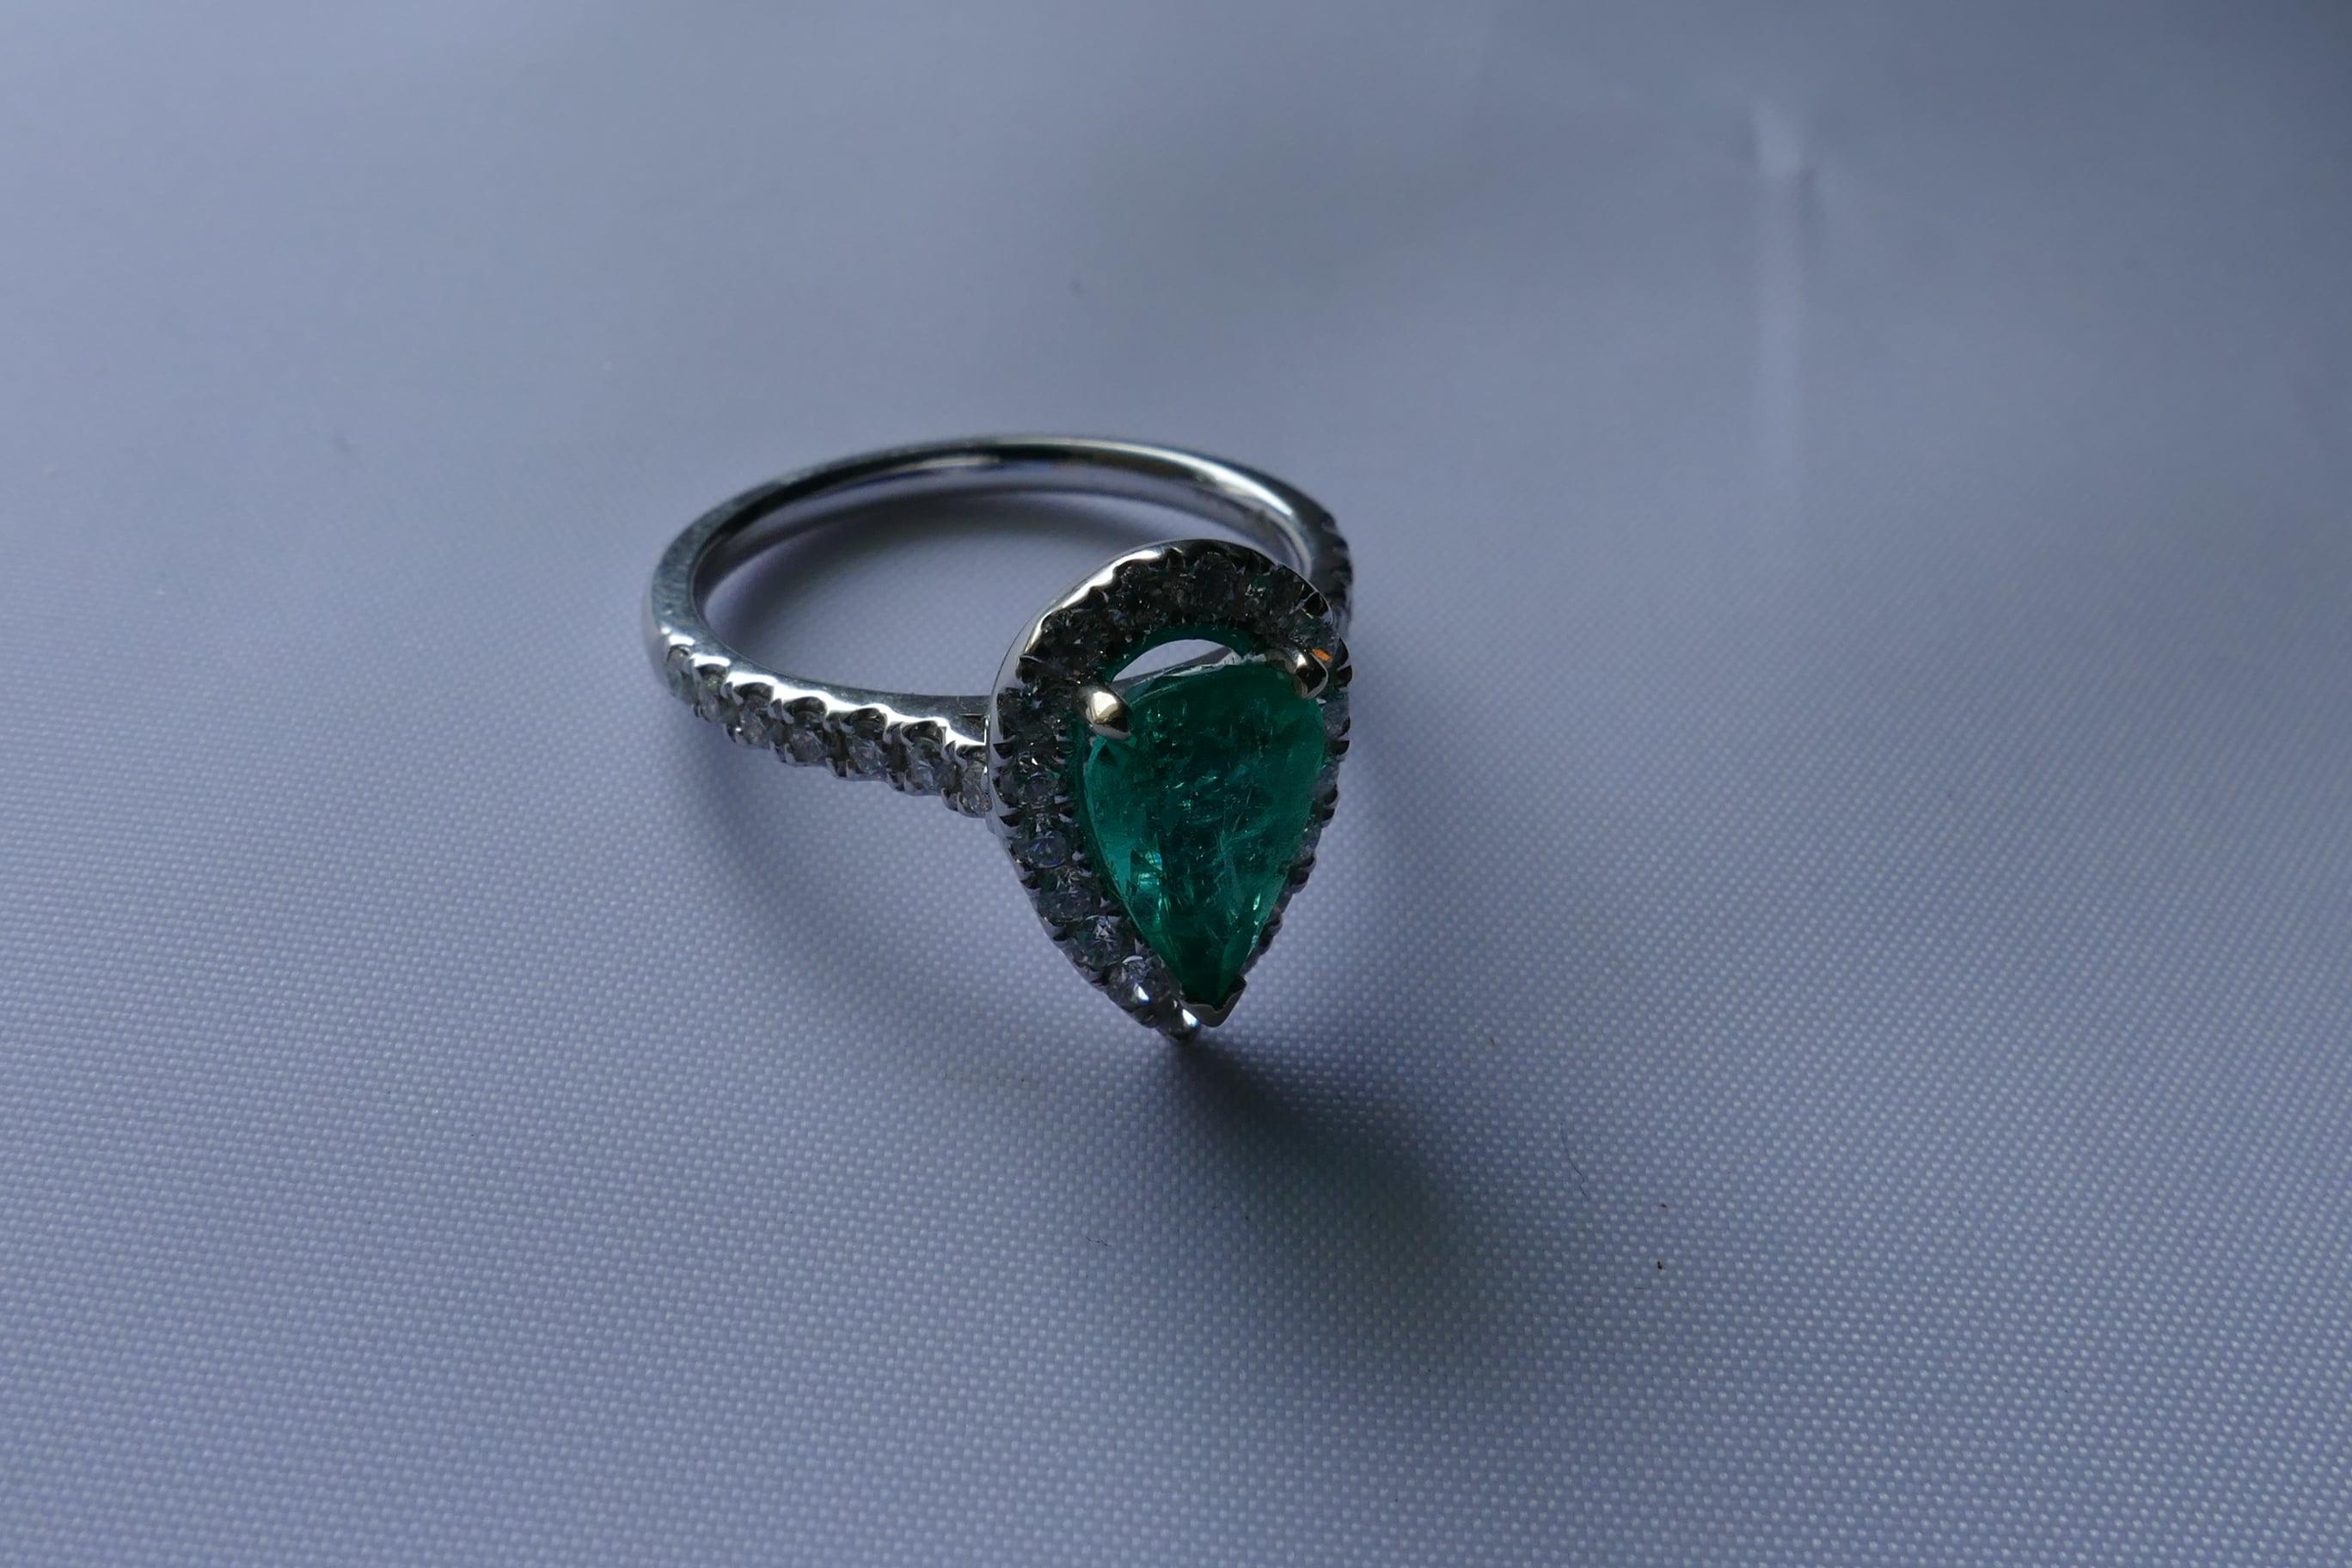 This 18ct White Gold Pear Shaped high quality Emerald is surrounded by 31 equally high level Round Cut Brilliant Diamonds totalling over half a carat.
Absolutely beautiful  natural colour Emerald stone which weighs 1.5 Carats and looks stunning on